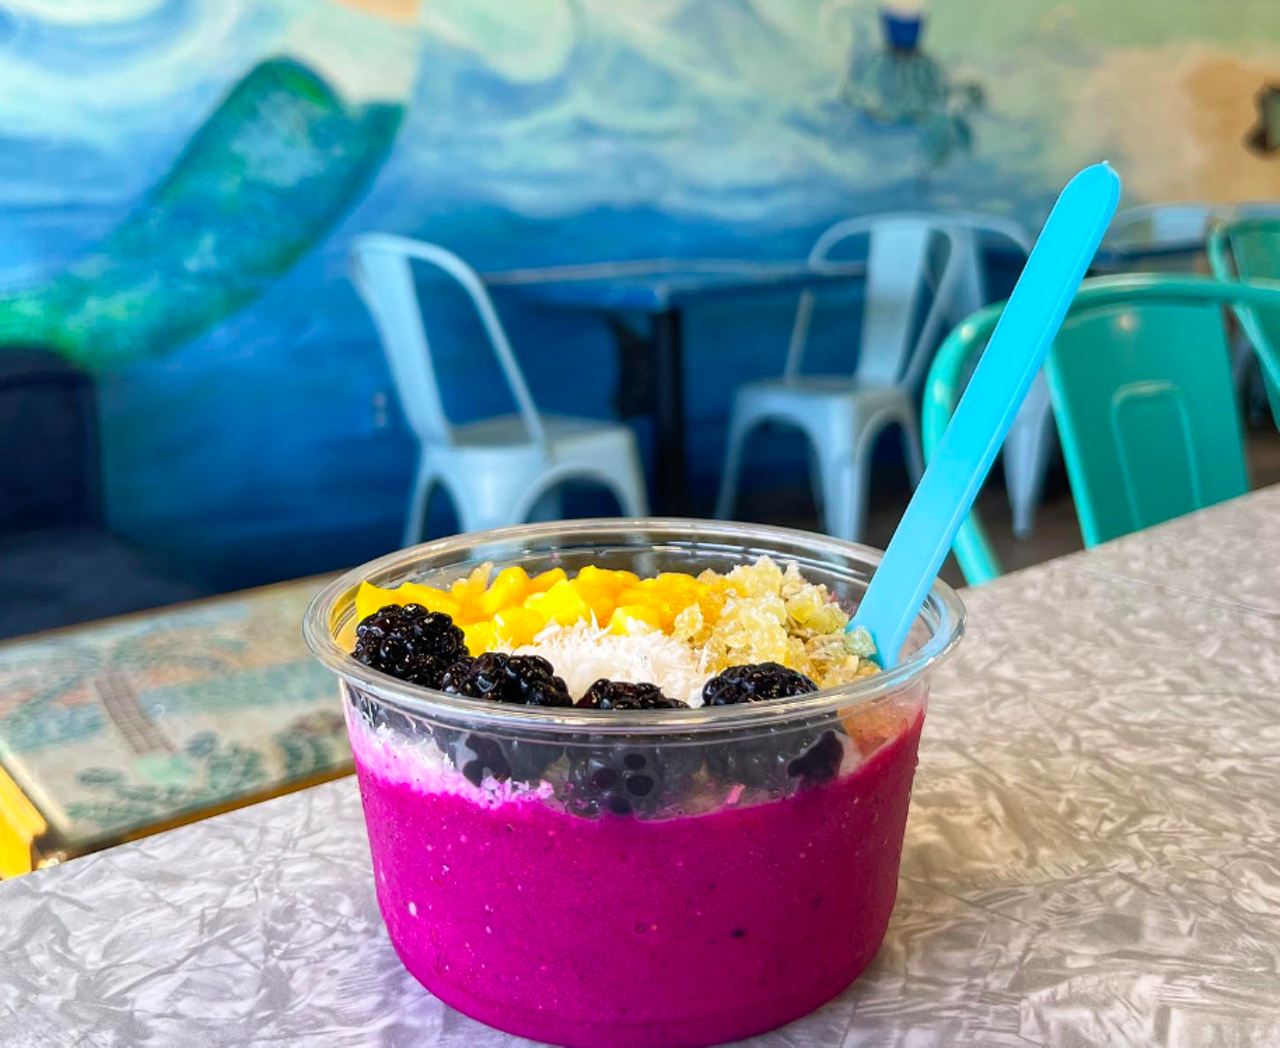 Tea Largo
4632 Cleveland Heights Blvd., Lakeland
Tea Largo, located in Lakeland, is known for their delicious açai bowls, boba teas, hot teas, matcha, chia pudding and oat bowls. It's the ideal spot for a quick, refreshing treat for summer.